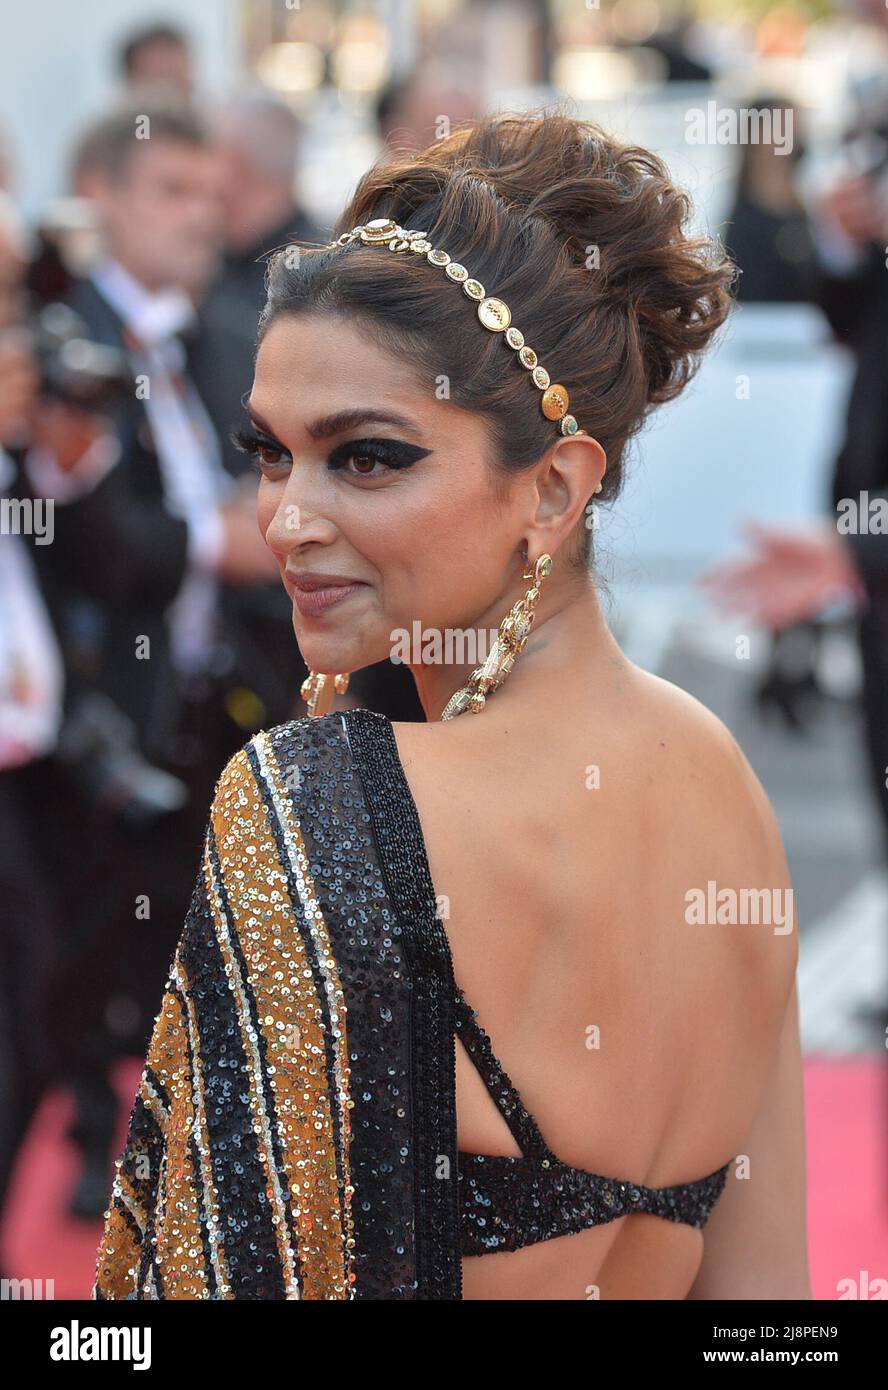 Cannes, France. 17th May, 2022. The actress Deepika Padukone attends the screening of 'Final Cut' (original title: 'Coupez!') and the Opening Ceremony Red Carpet during the 75th Annual Cannes Film Festival at Palais des Festivals. Credit: Stefanie Rex/dpa/Alamy Live News Stock Photo